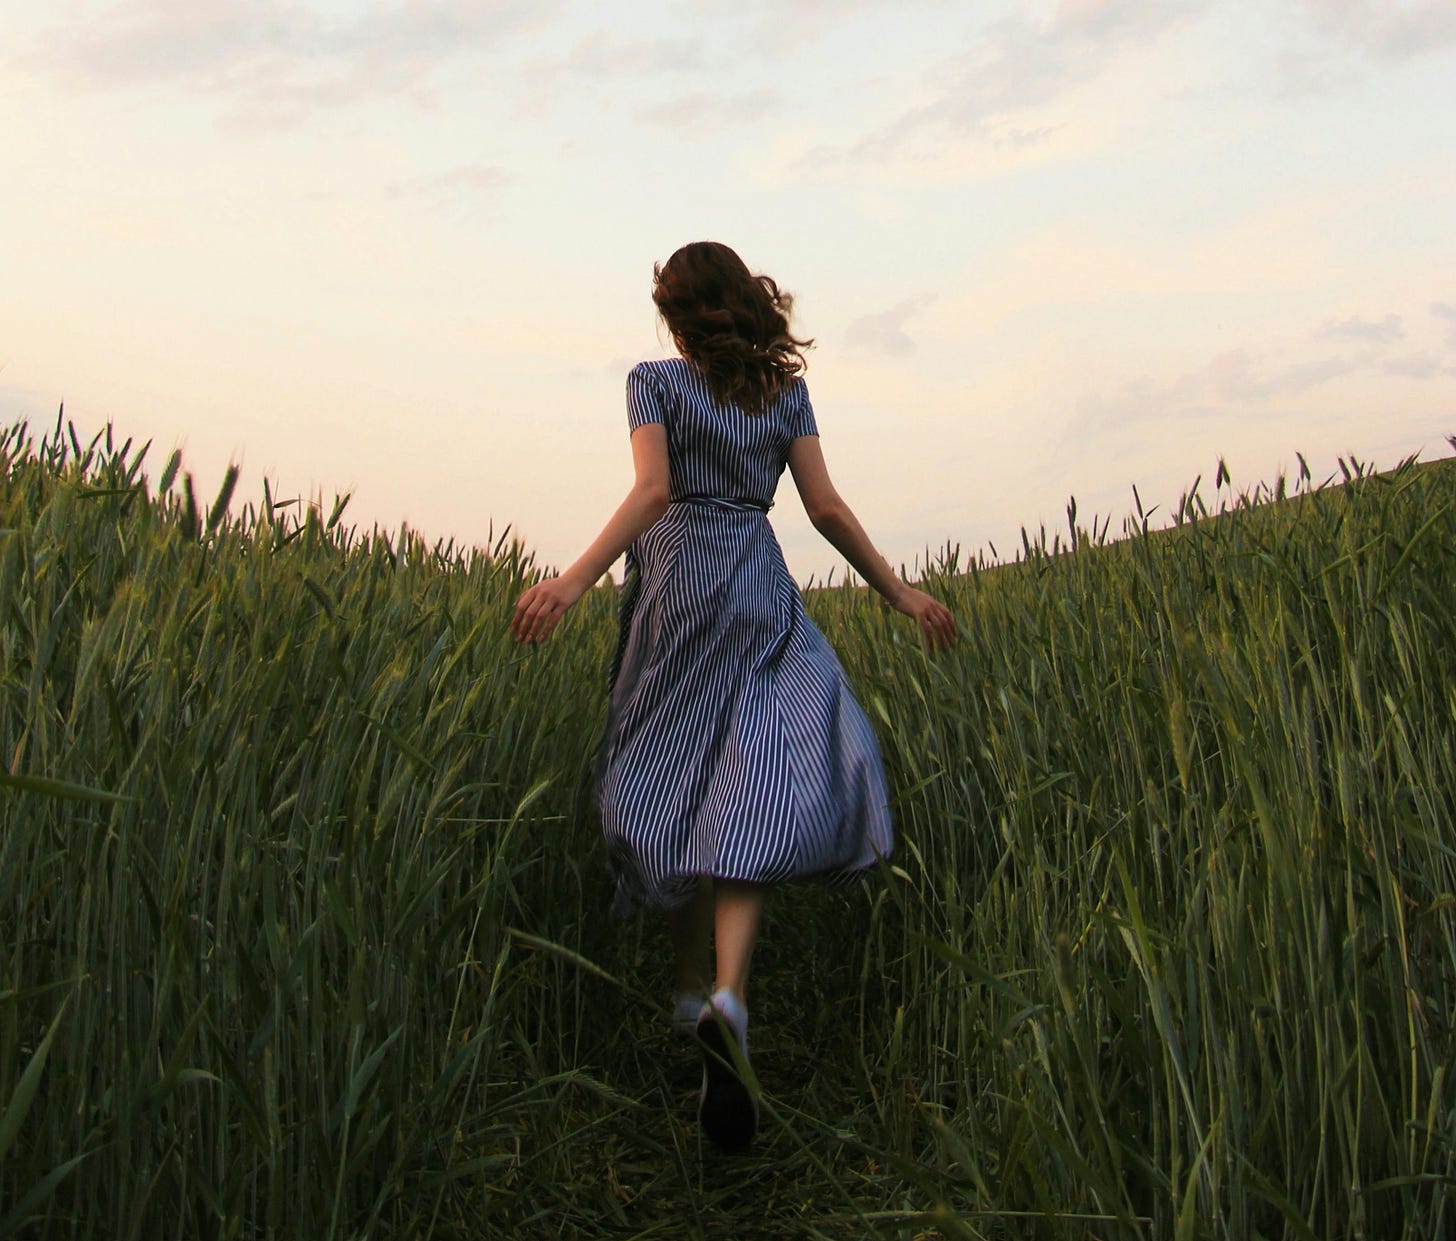 Woman in striped dress running into a field of wheat under a cloudy sky.